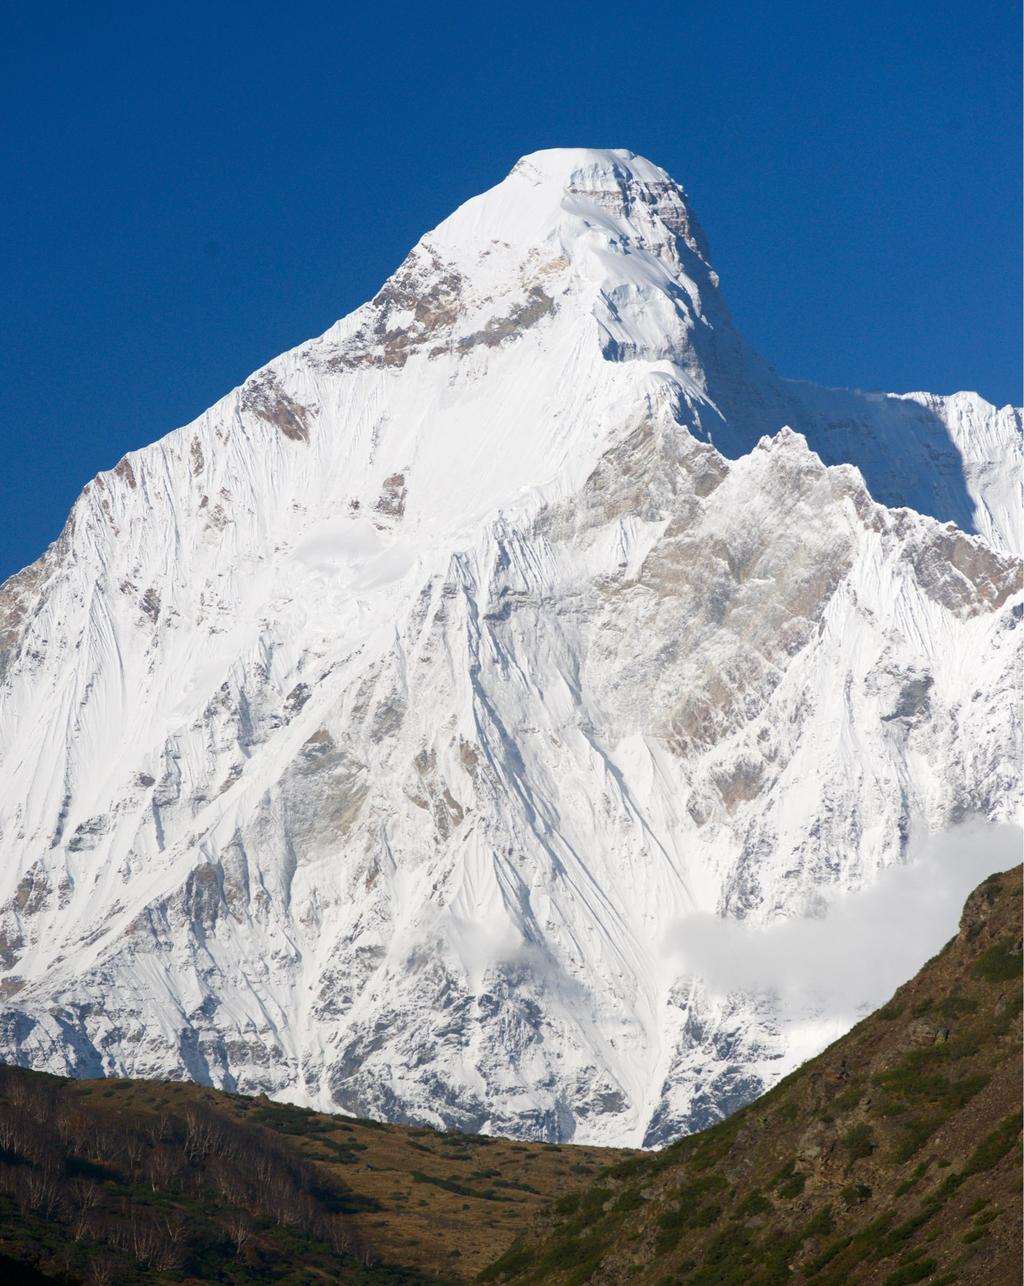 High Point reached by Martin Moran 2015 North East Ridge South East Ridge The typical route used on Nanda Devi East is the south-east route which was used by the Polish when they did the